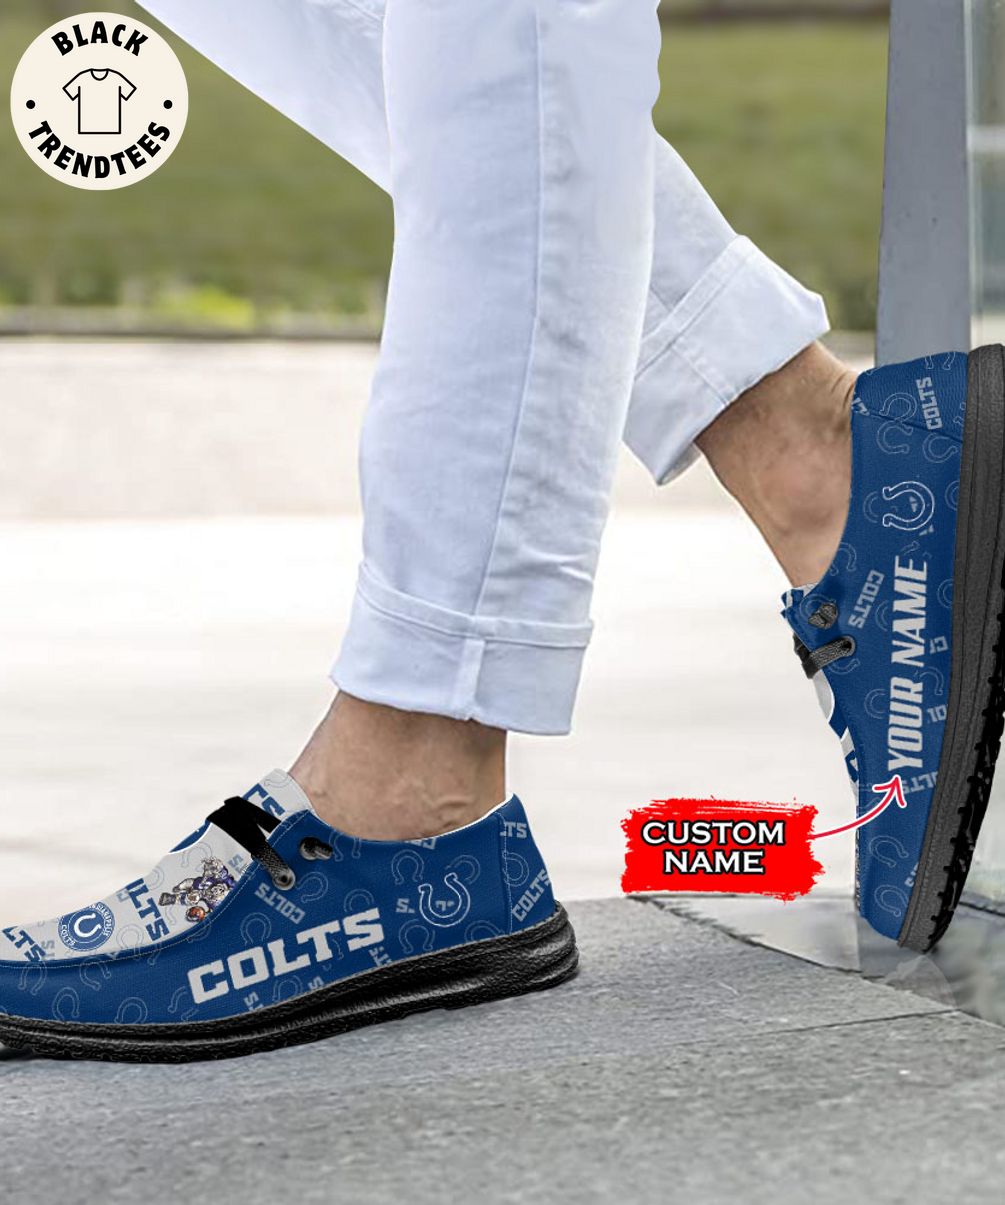 AVAILABLE NFL Indianapolis Colts Custom Name Hey Dude Shoes